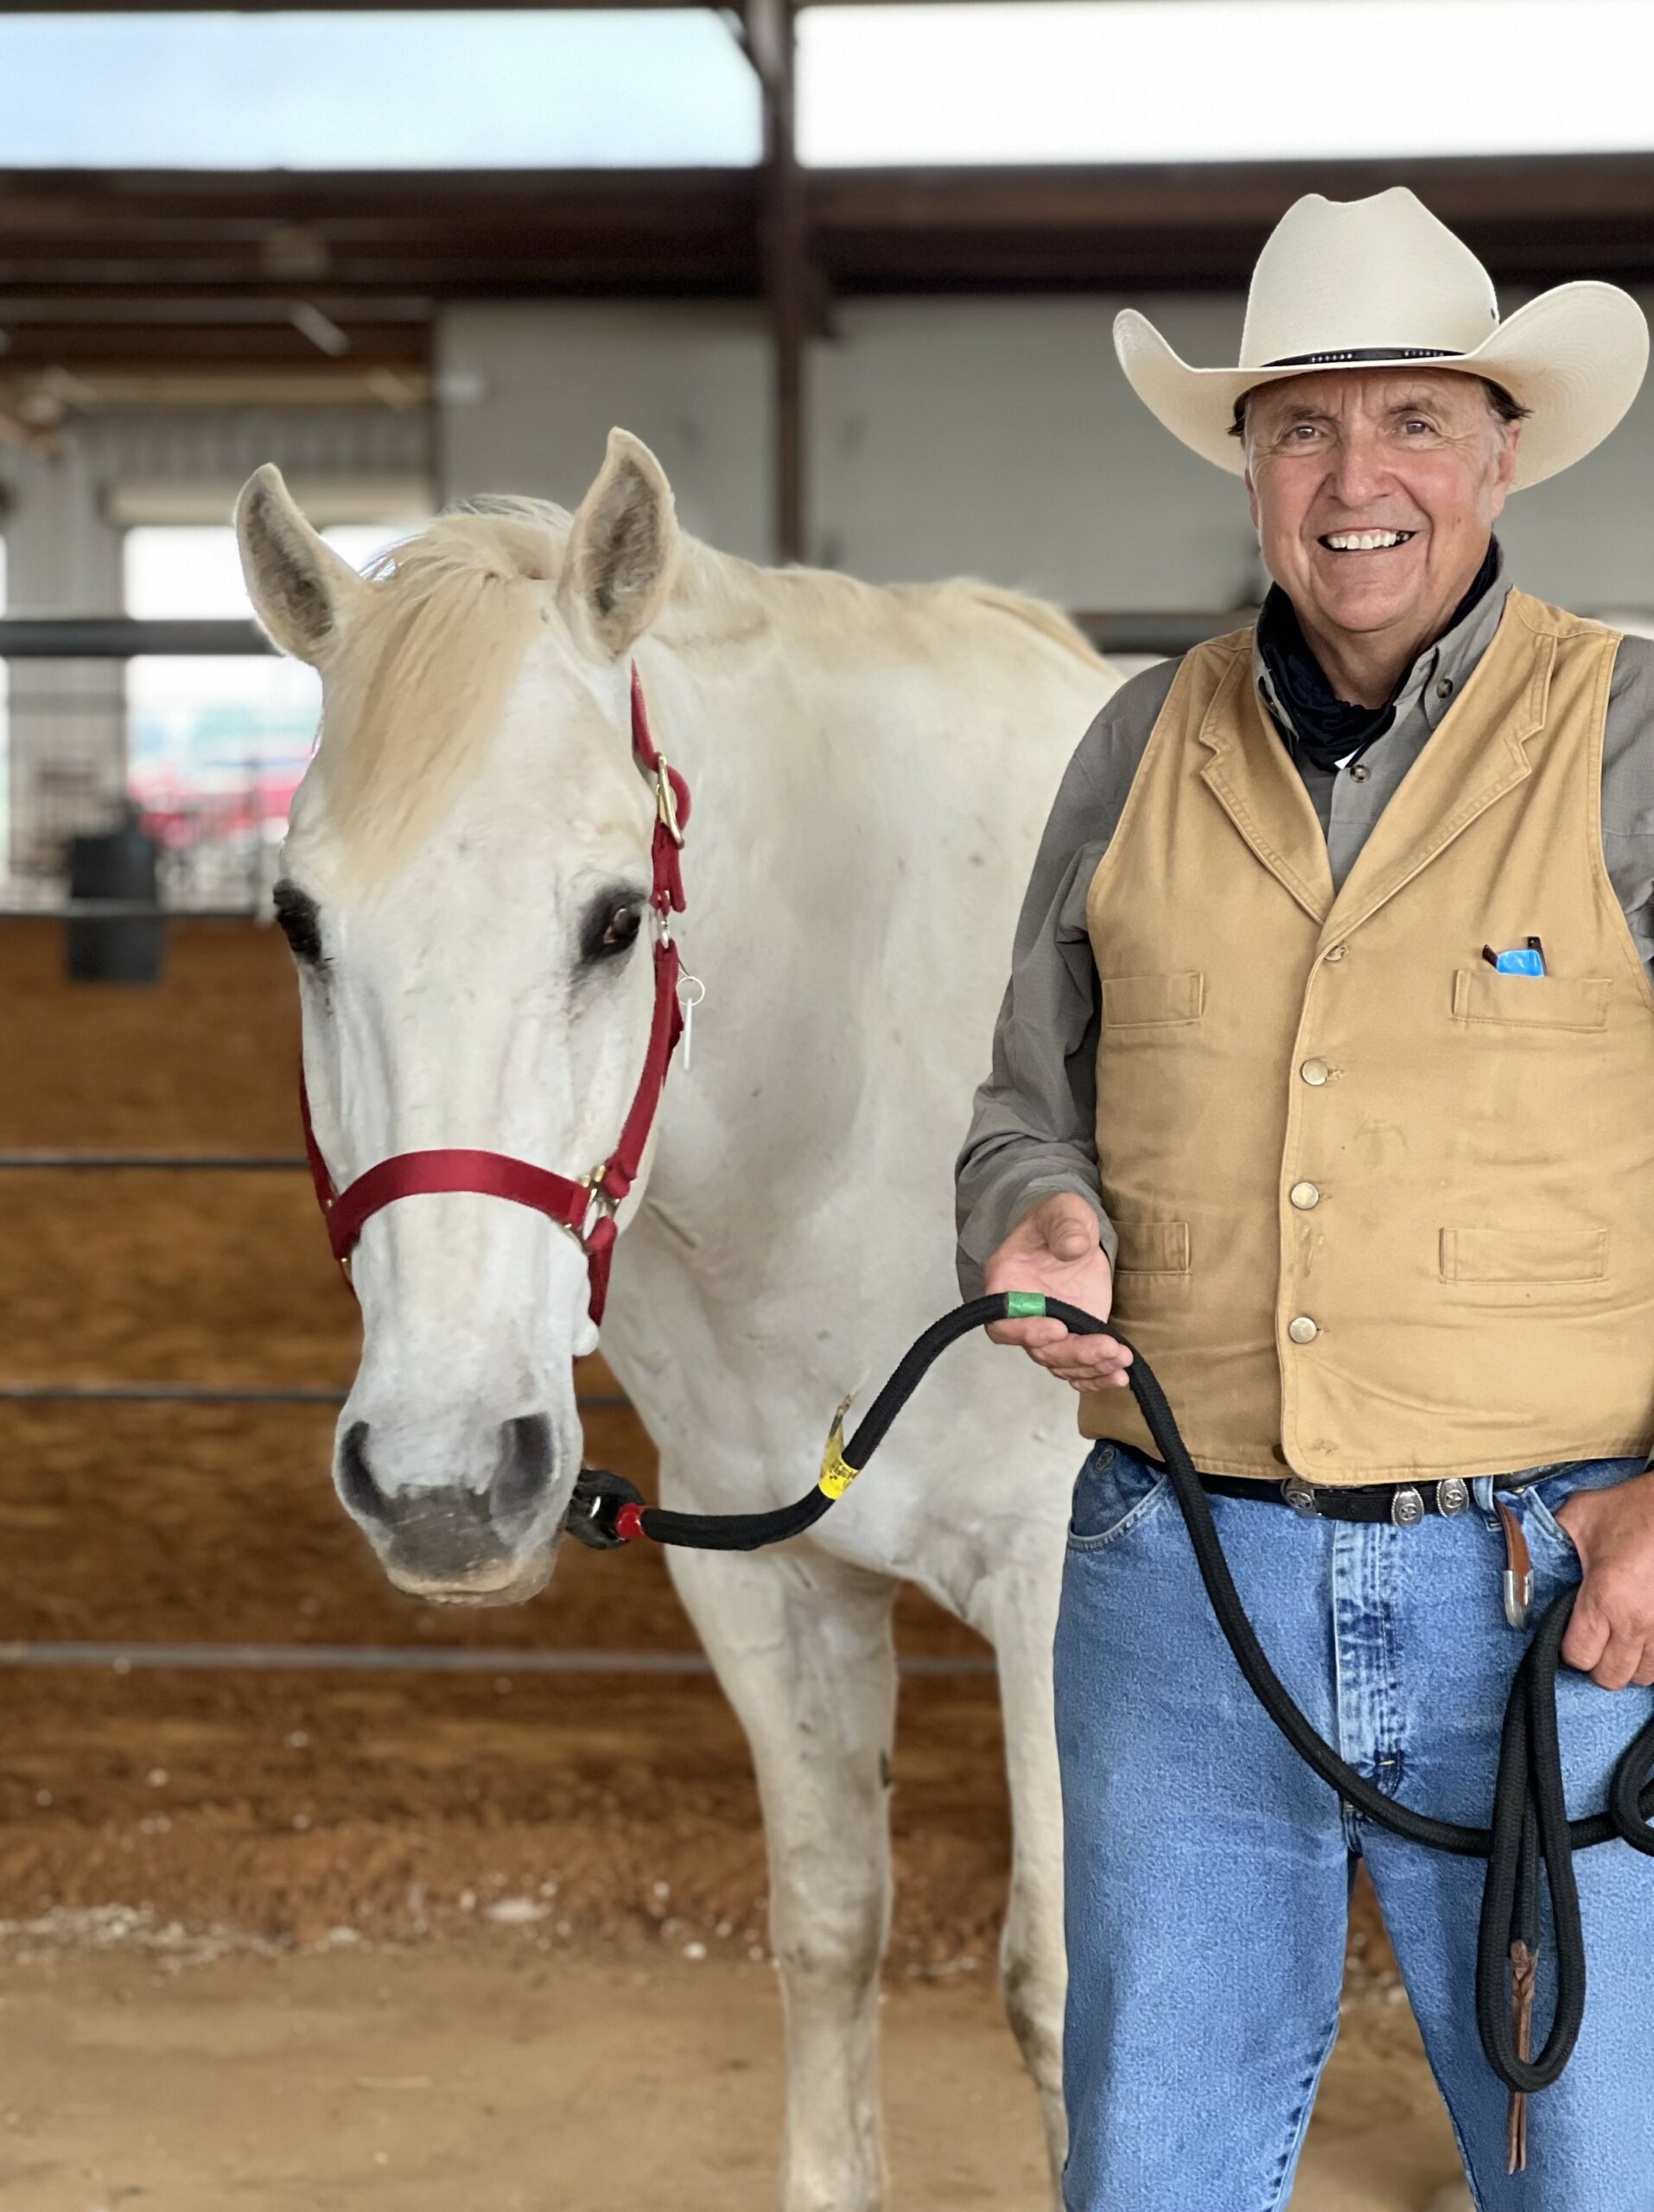 Kevin Bowers, Rock On Veterans Coordinator, PATH Intl. Certified Therapeutic Riding Instructor